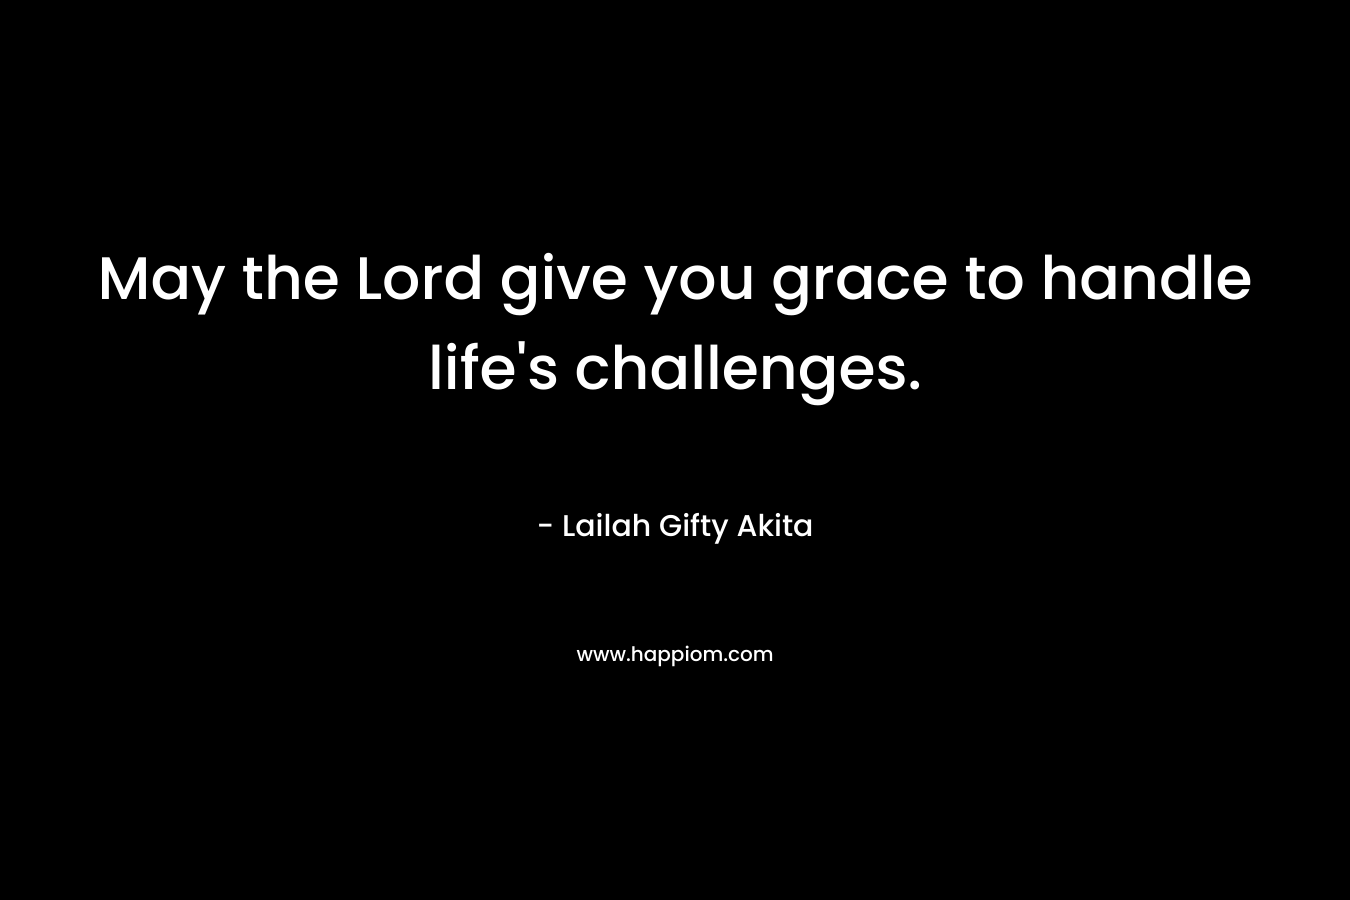 May the Lord give you grace to handle life's challenges.